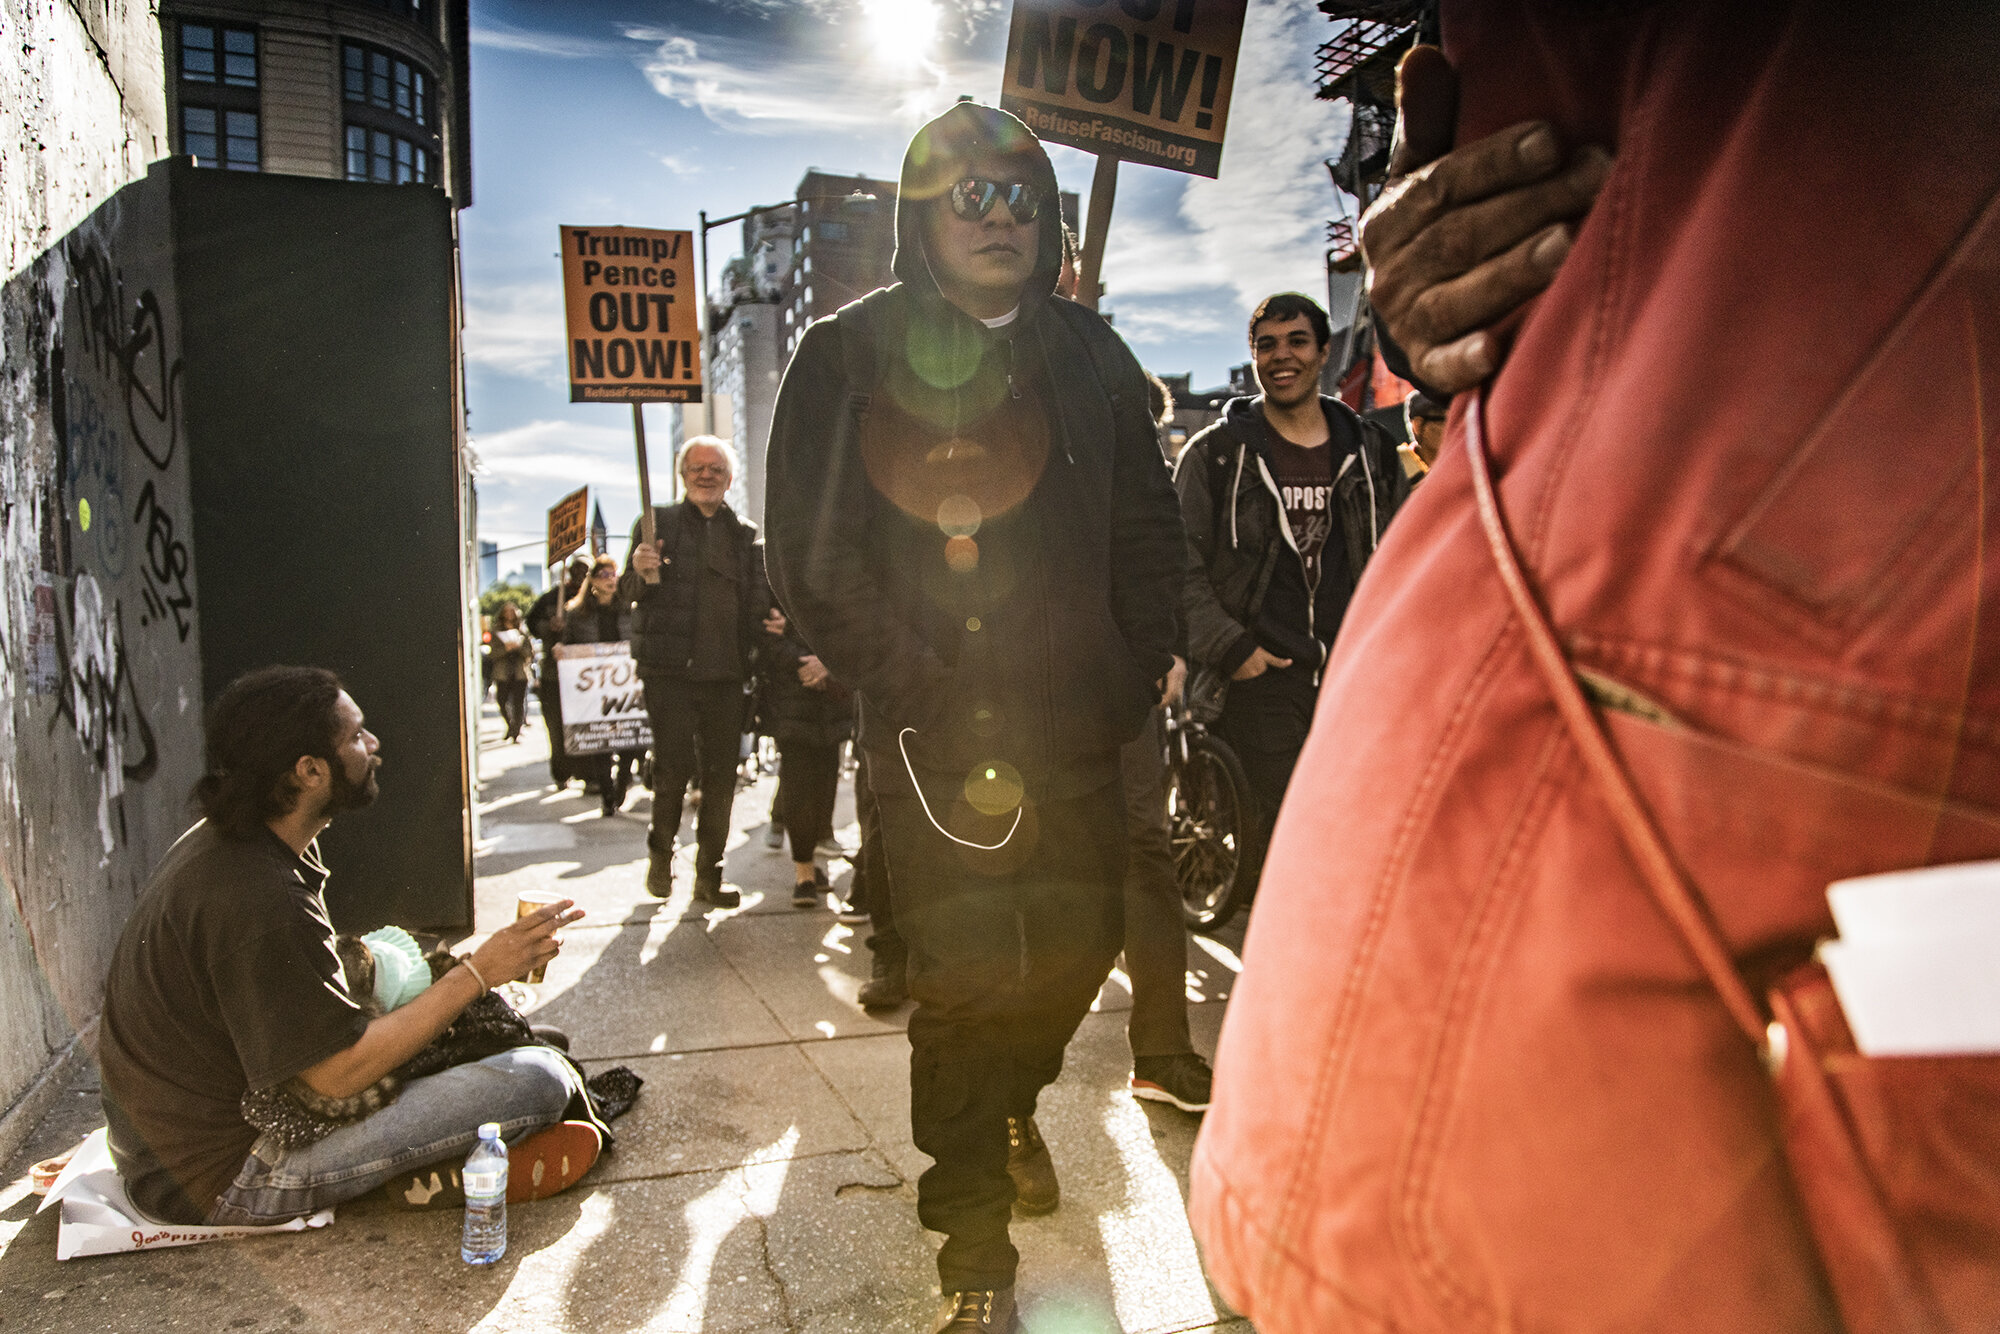 OUTNOW_Protest_2019_NYC-2176.jpg